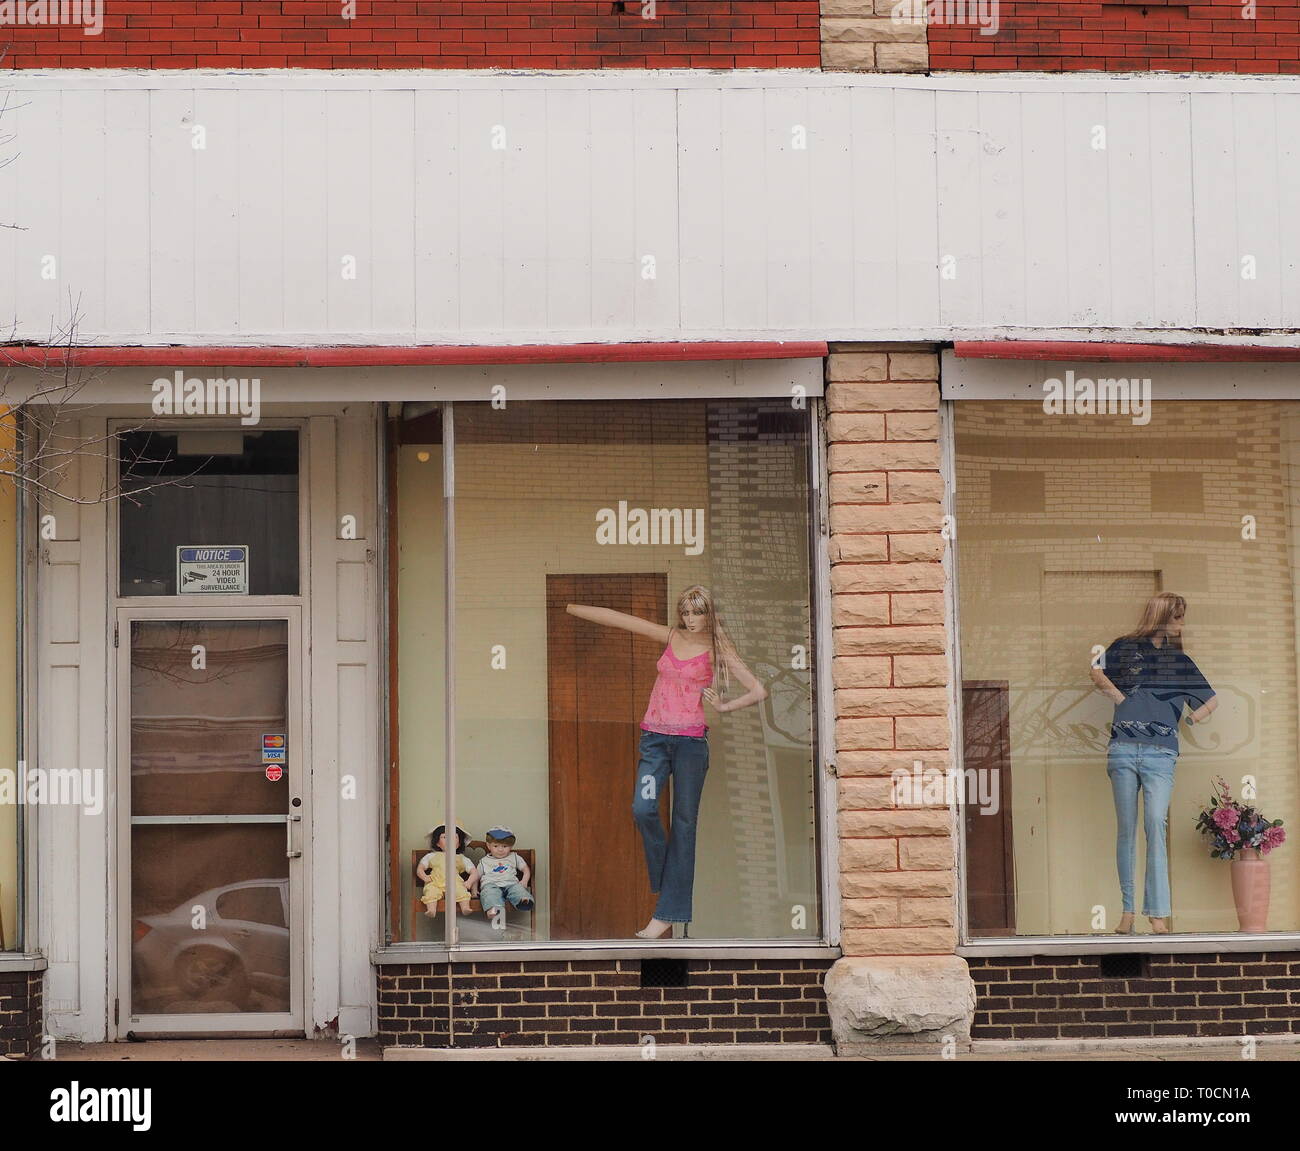 old store front of abandoned clothing store with mannequin Stock Photo